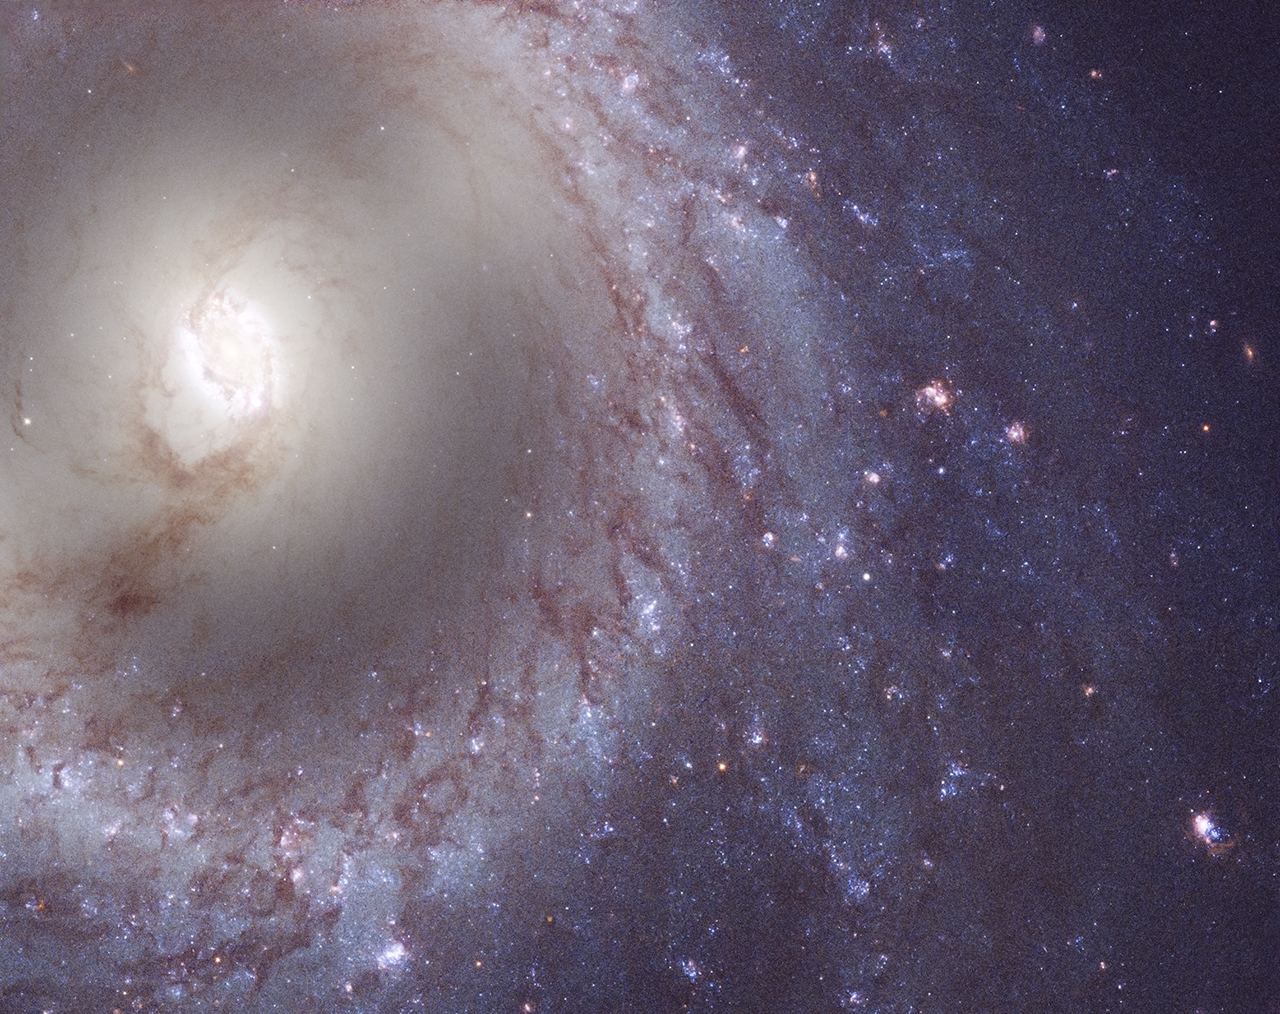 the NGC 3351 Barred Spiral Galaxy